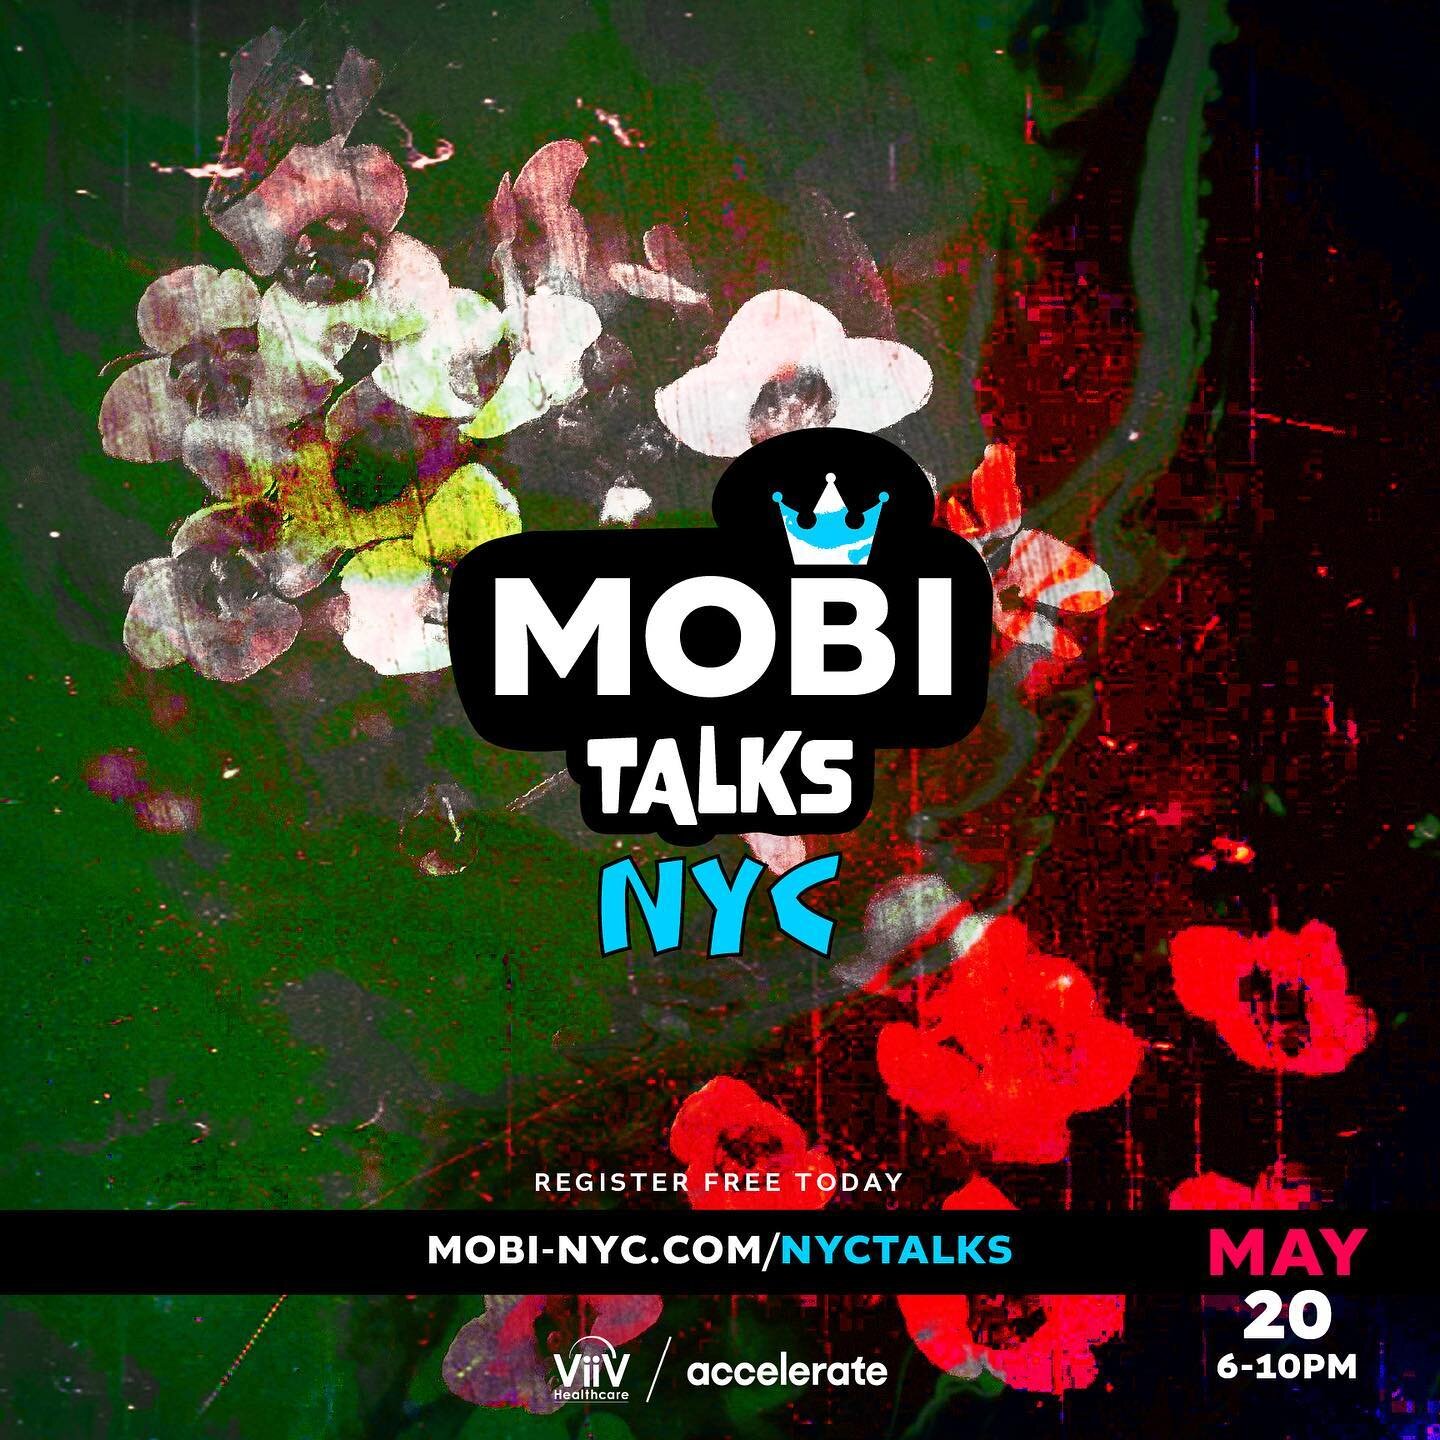 Next Stop on The MOBITALKS Tour&hellip;.
NEW YORK CITY! ✨😼🤞🏾 A Fav!!
In less than A Month, May 20th
(6-10PM)

An intimate evening experience! 
REGISTRATION OPEN ⬇️
mobi-nyc.com/nyctalks 

#nyc #MOBITALKS #conversation #intimacy #engagement #commun